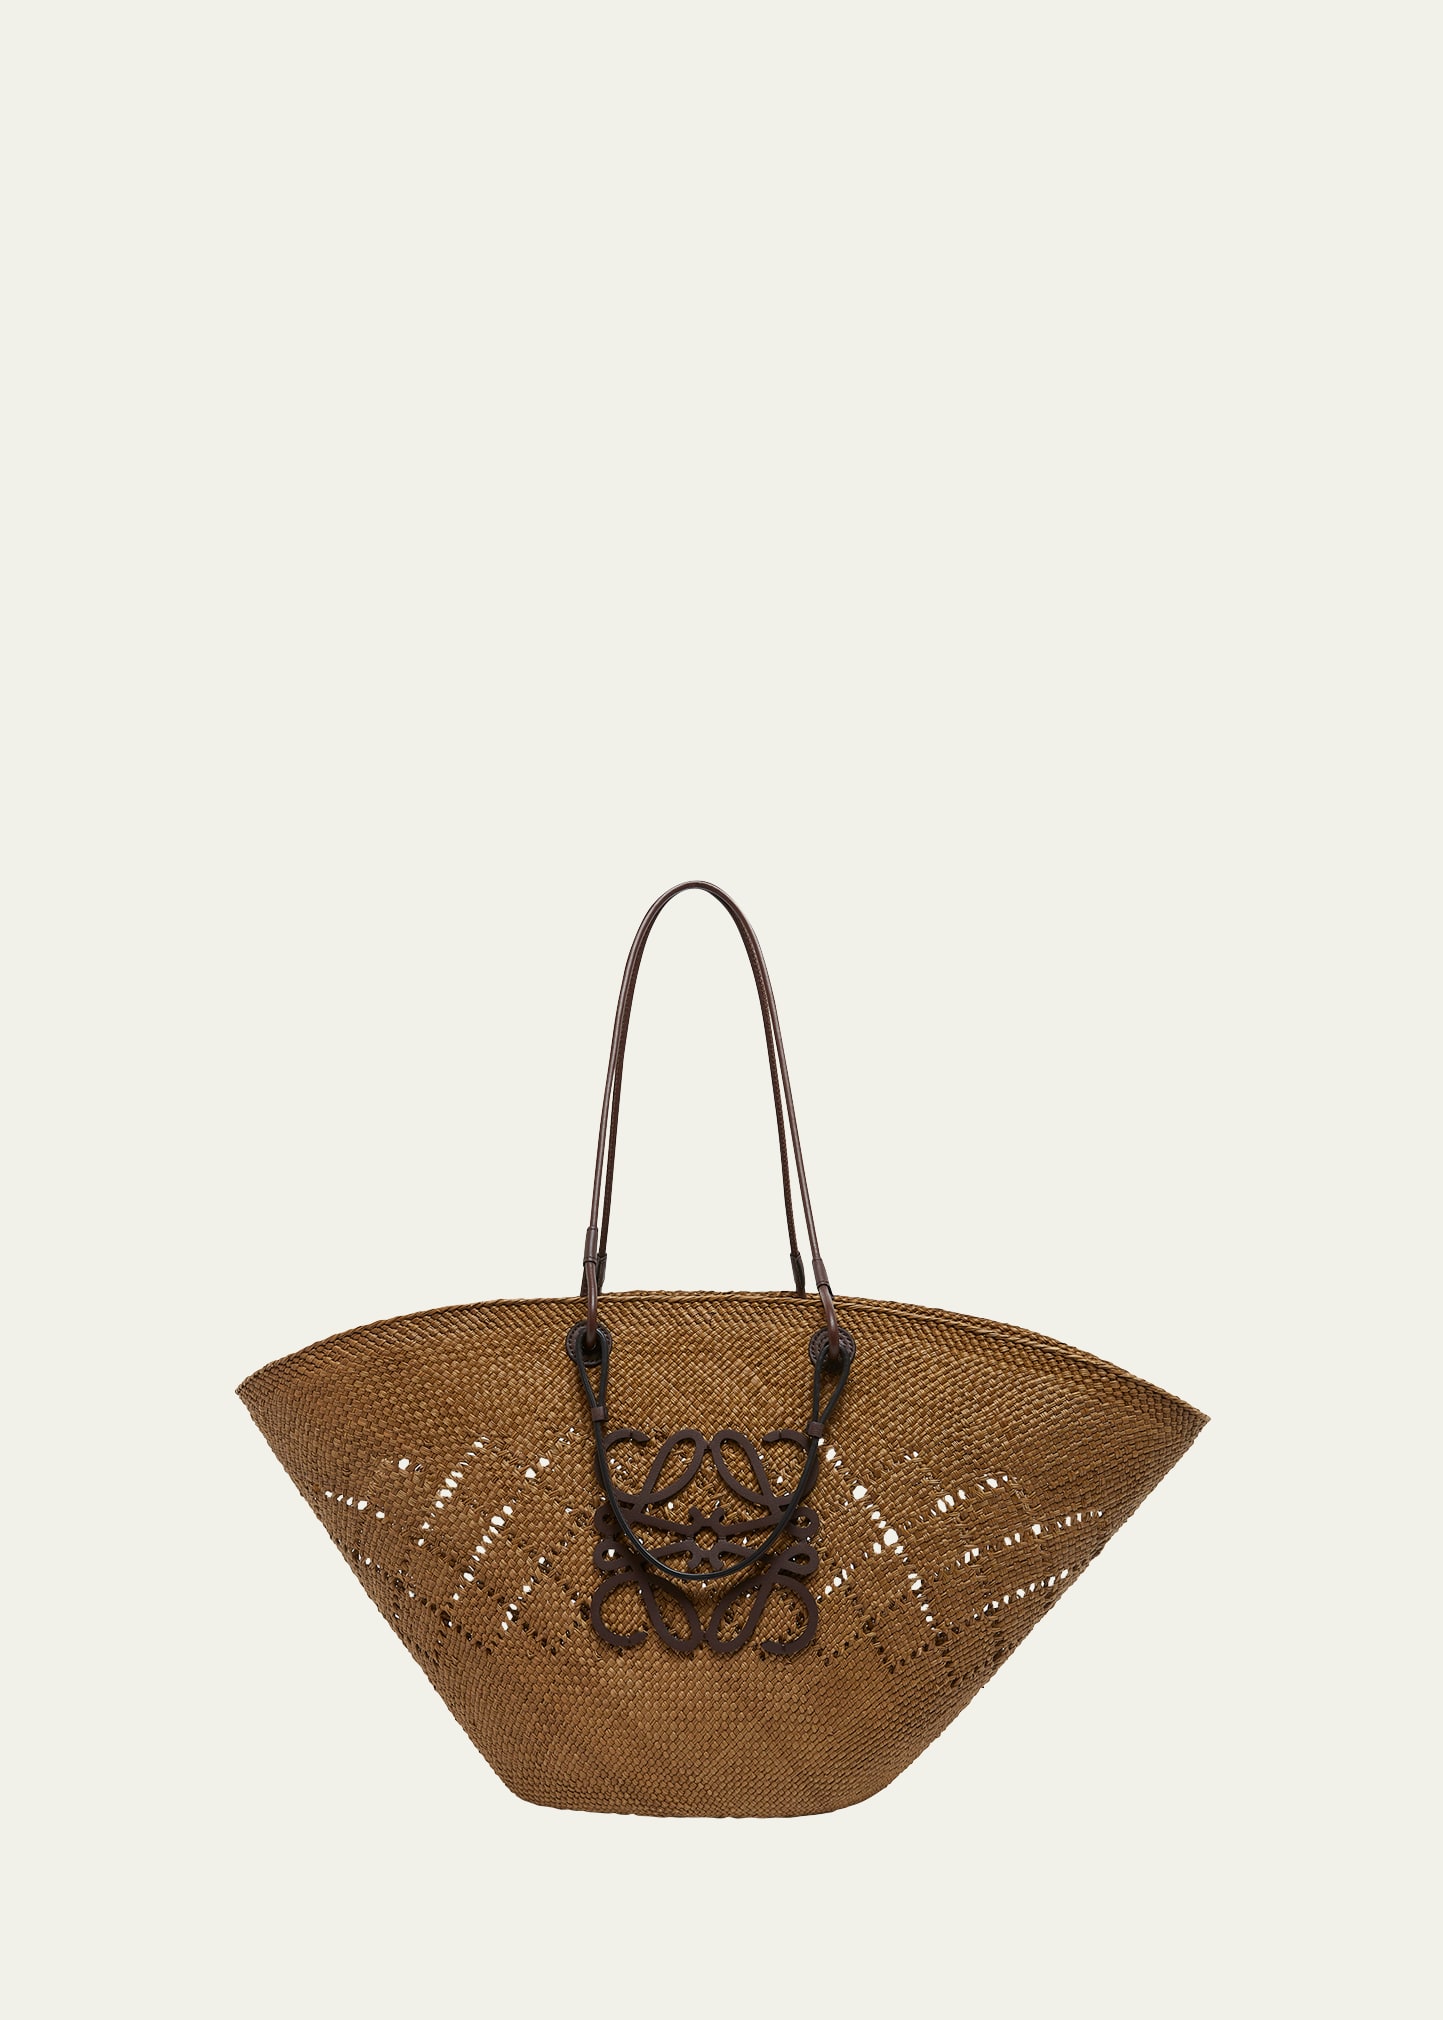 x Paula's Ibiza Large Anagram Basket Tote Bag in Iraca Palm with Leather Handles